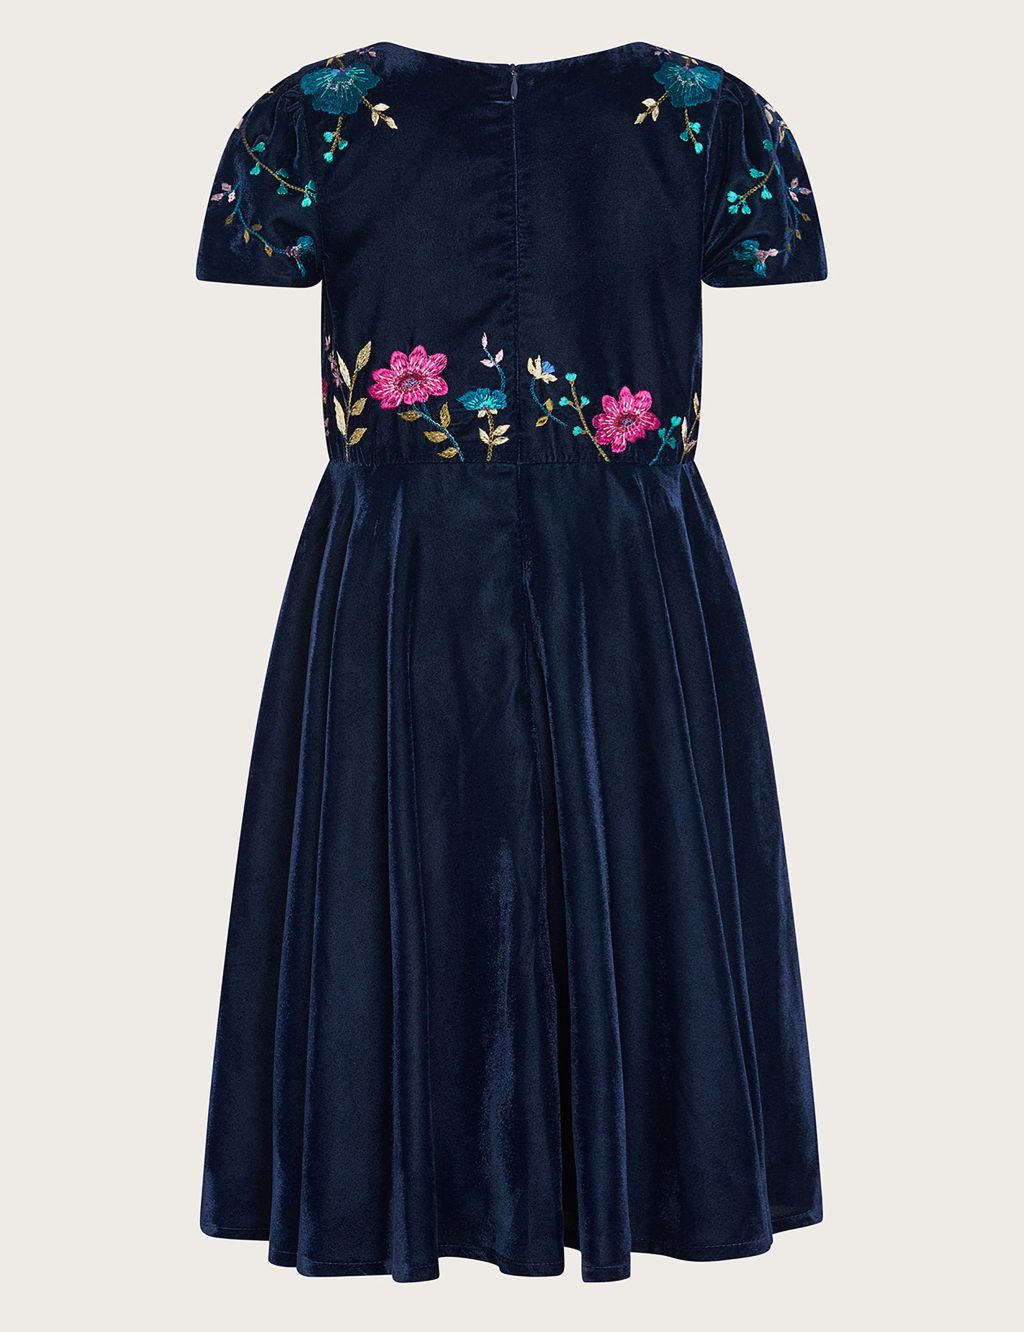 Velvet Floral Embroidered Occasion Dress (3-15 Yrs) 1 of 3